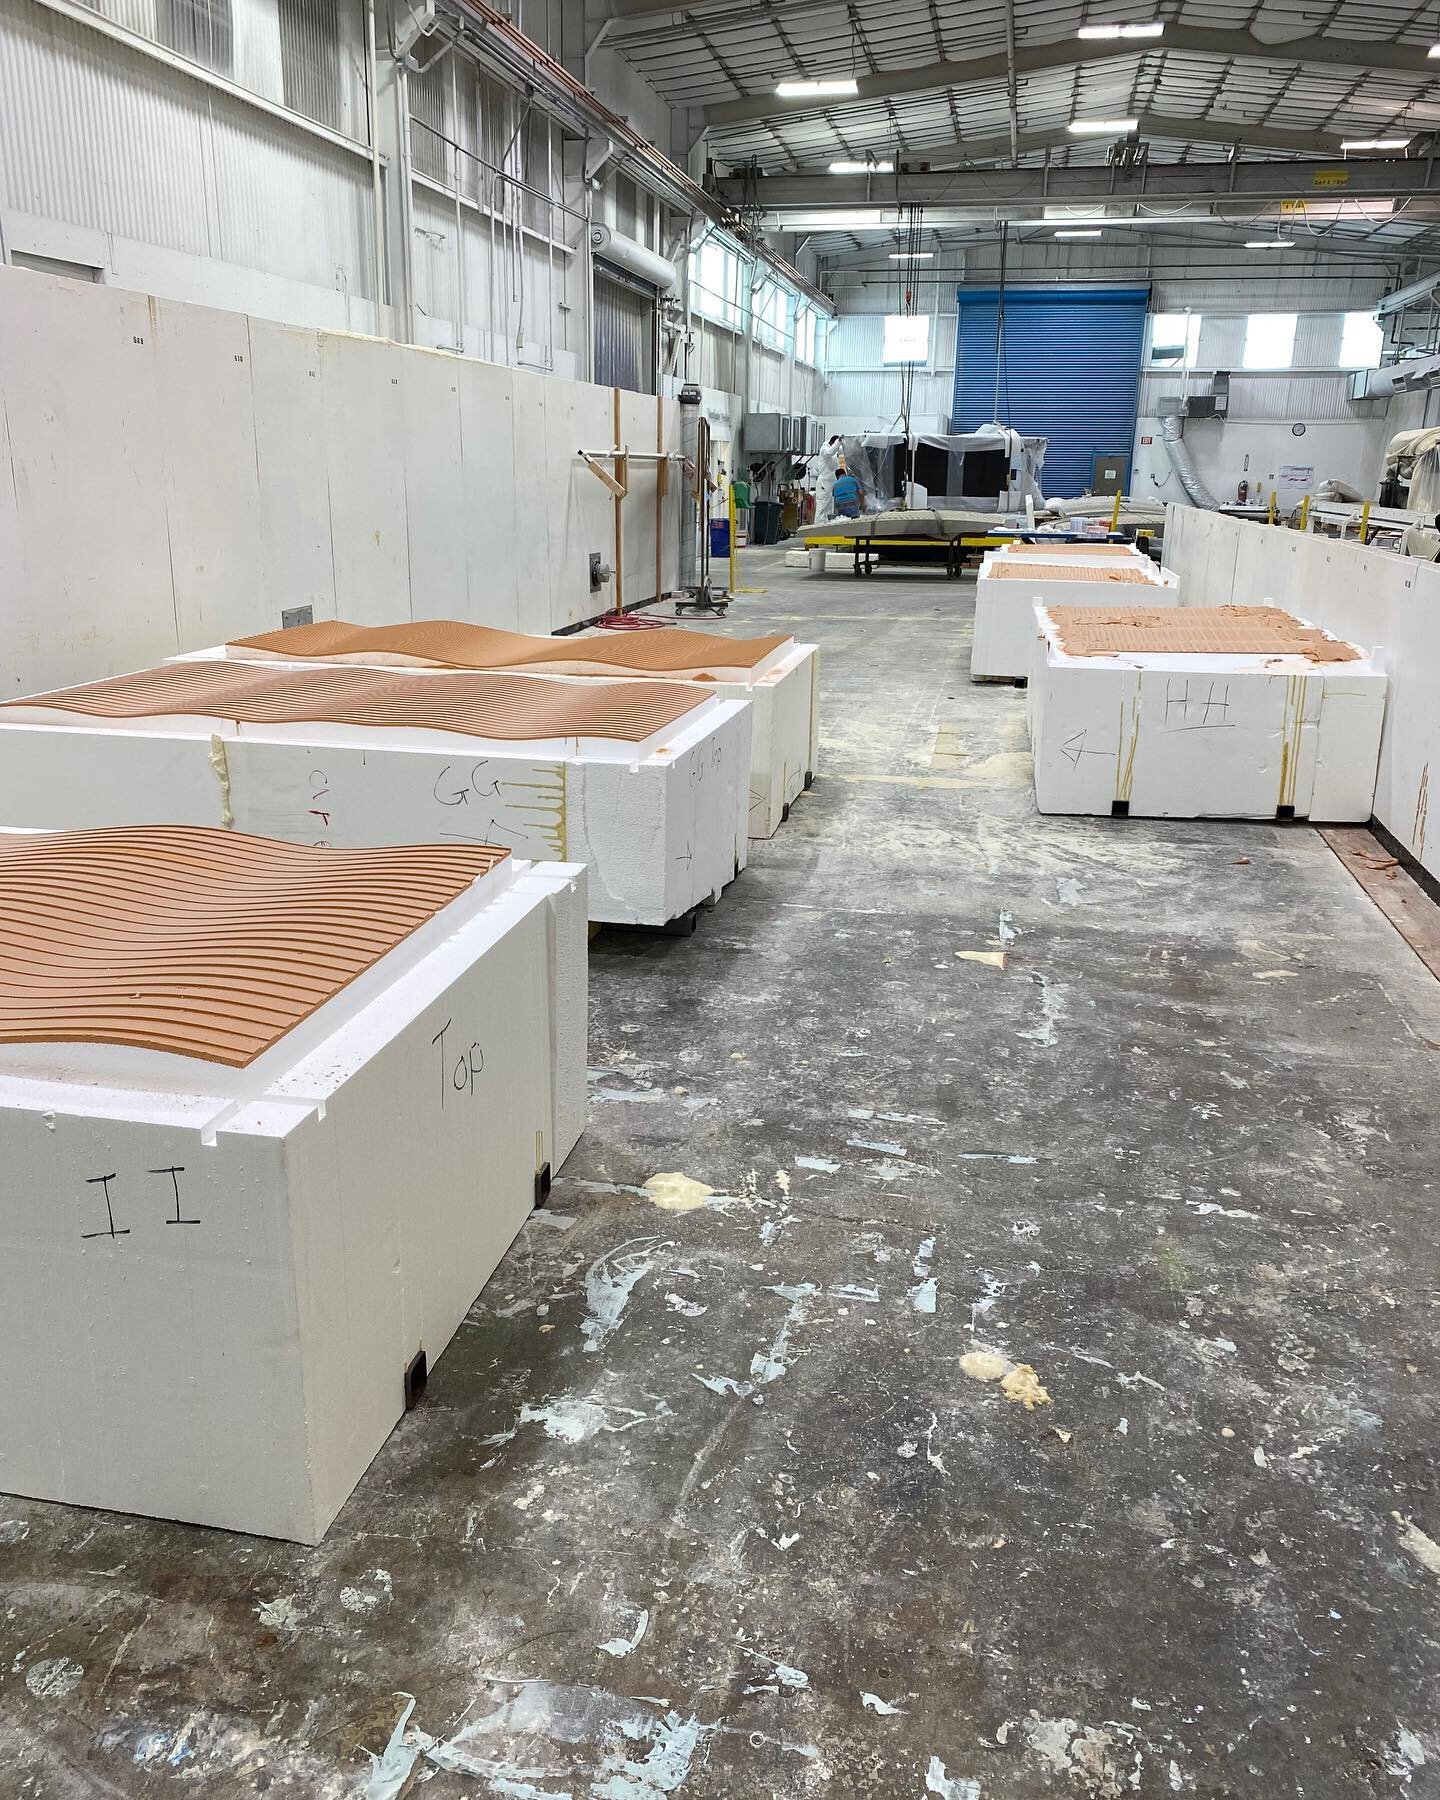 Look! Our molds being prepared for casting. These will become panels for an entry wall at a biotech campus&hellip; super excited!

#landscapearchitecture
#landscapedesign
#womeninarchitecture
#womenindesign
#womensupportingwomen
#sustainabledesign
#c